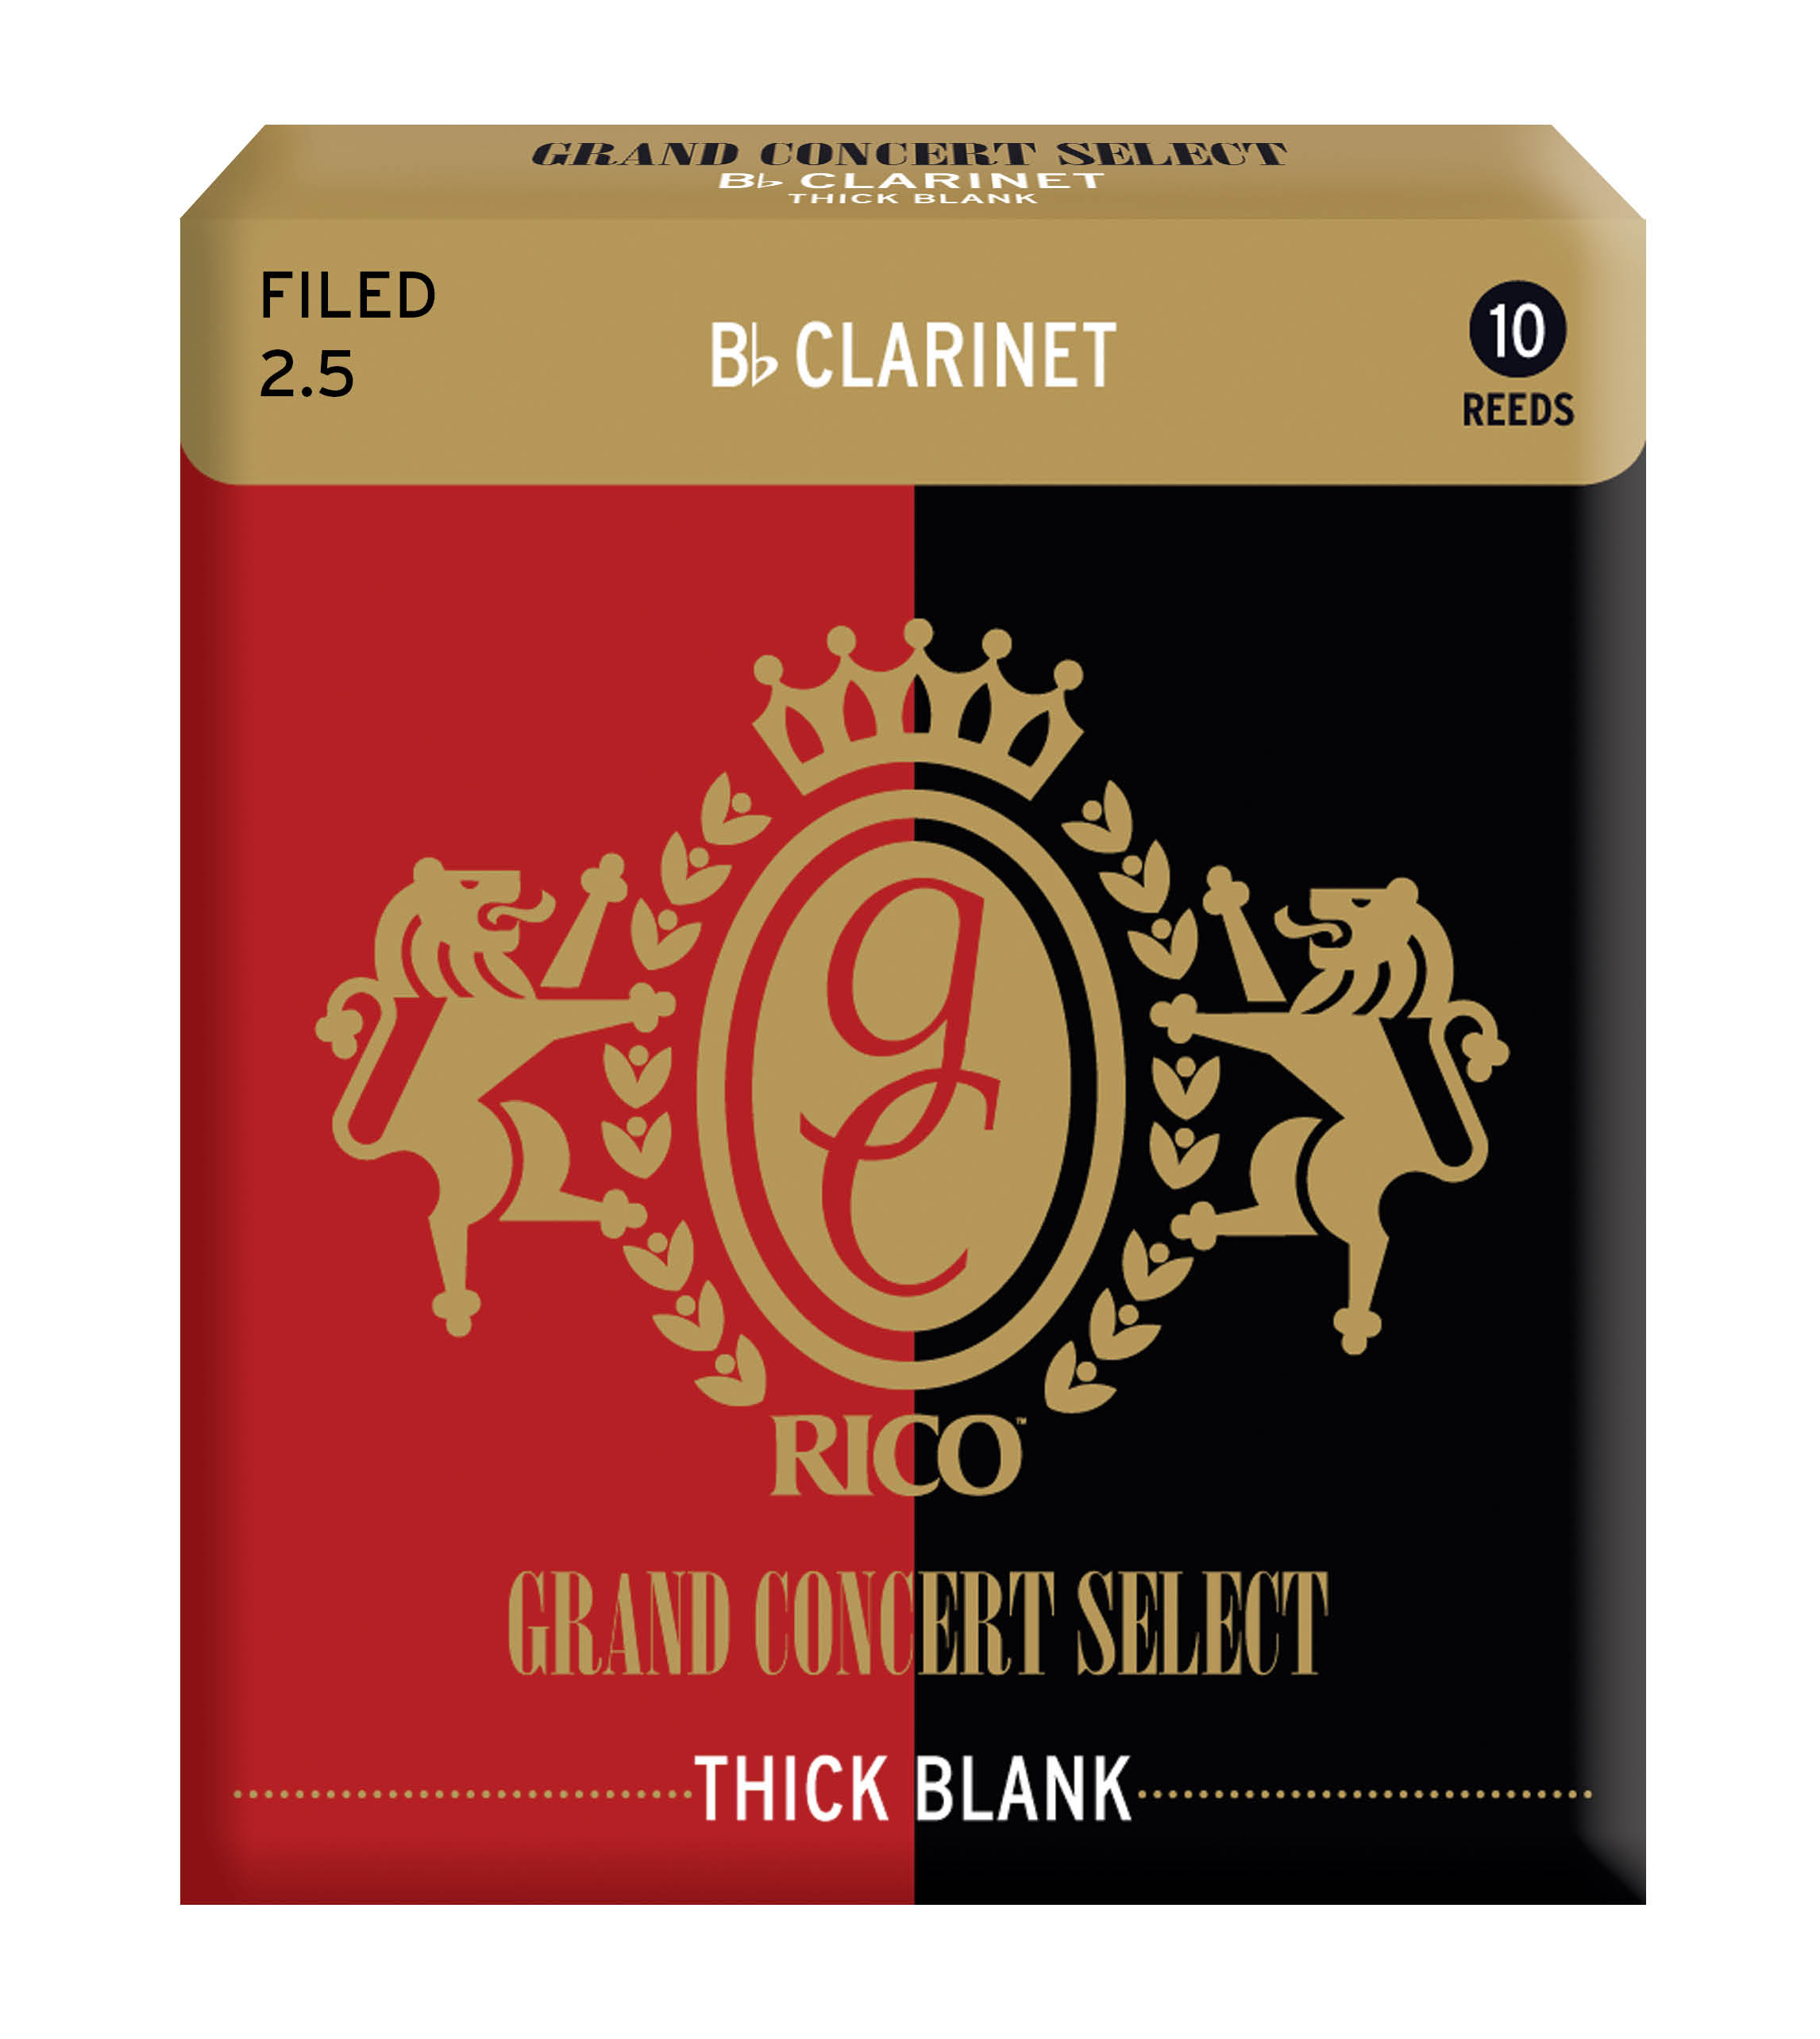 D'Addario Grand Concert Select Thick Blank Bb Clarinet Reeds, Filed, Strength 2.5, 10 Pack